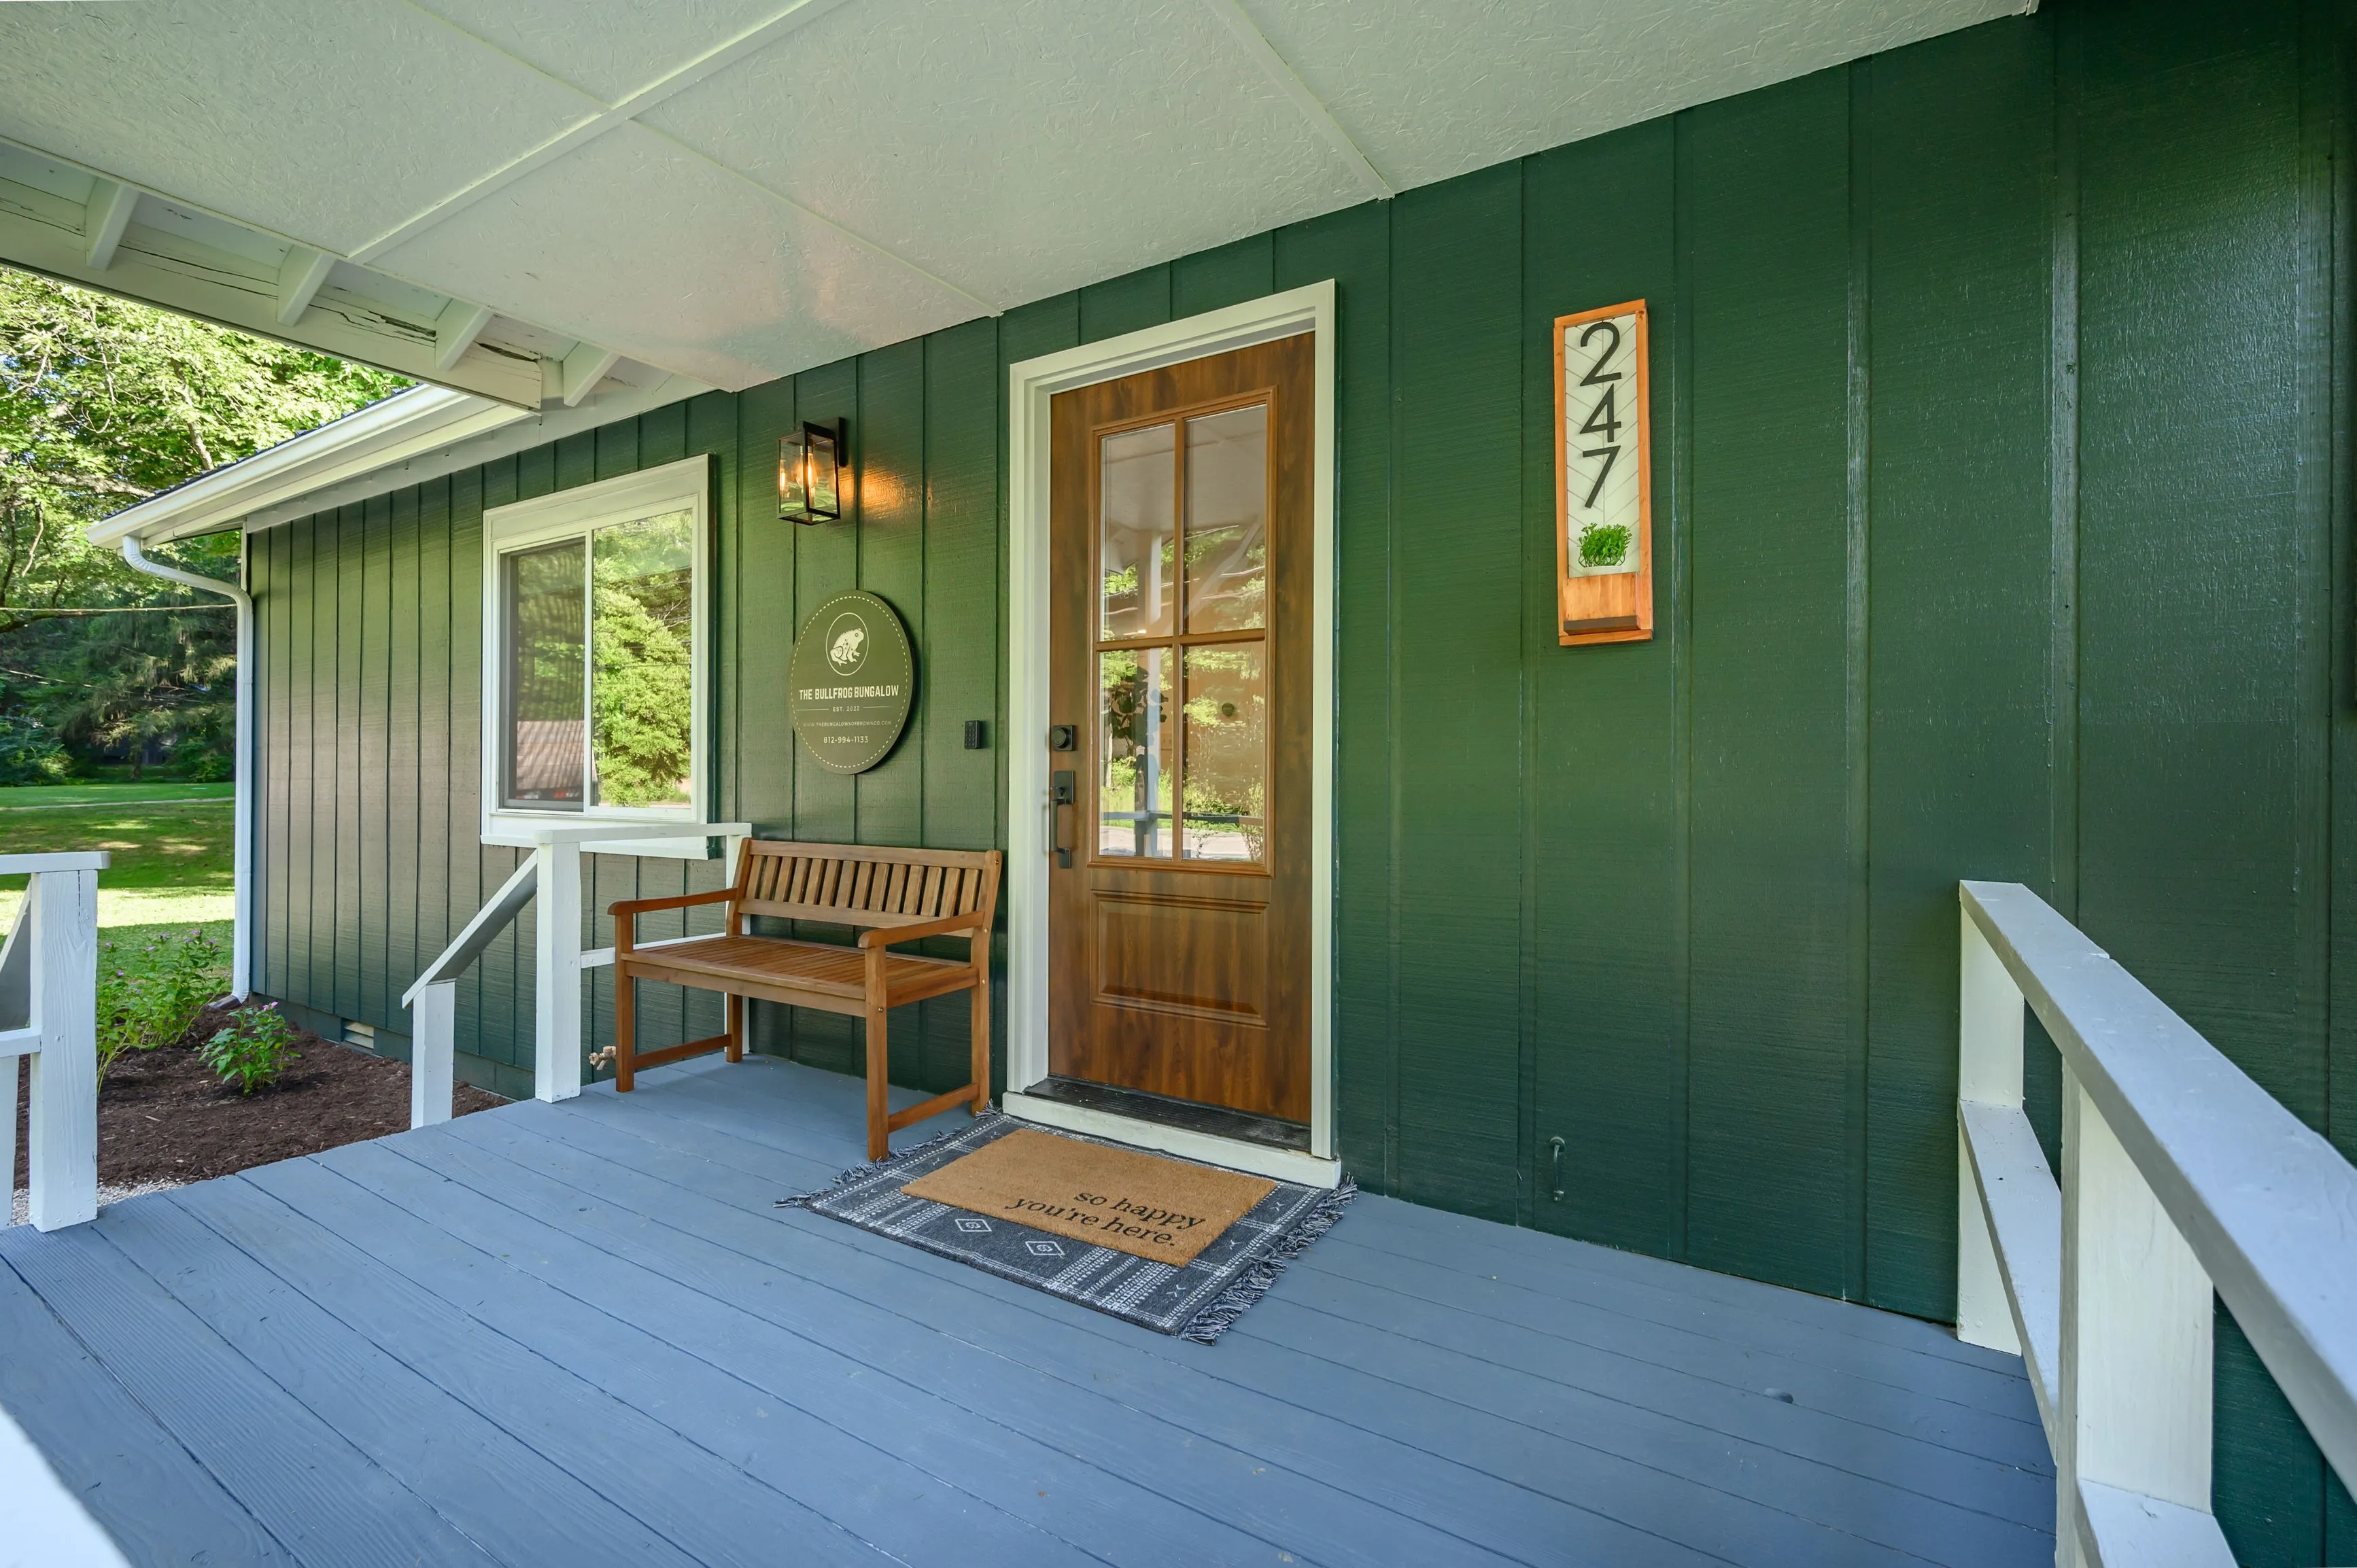 Home entrance with a dark green exterior, wooden front door with glass panes, a welcoming doormat, a bench, house number 247, and decorative elements.